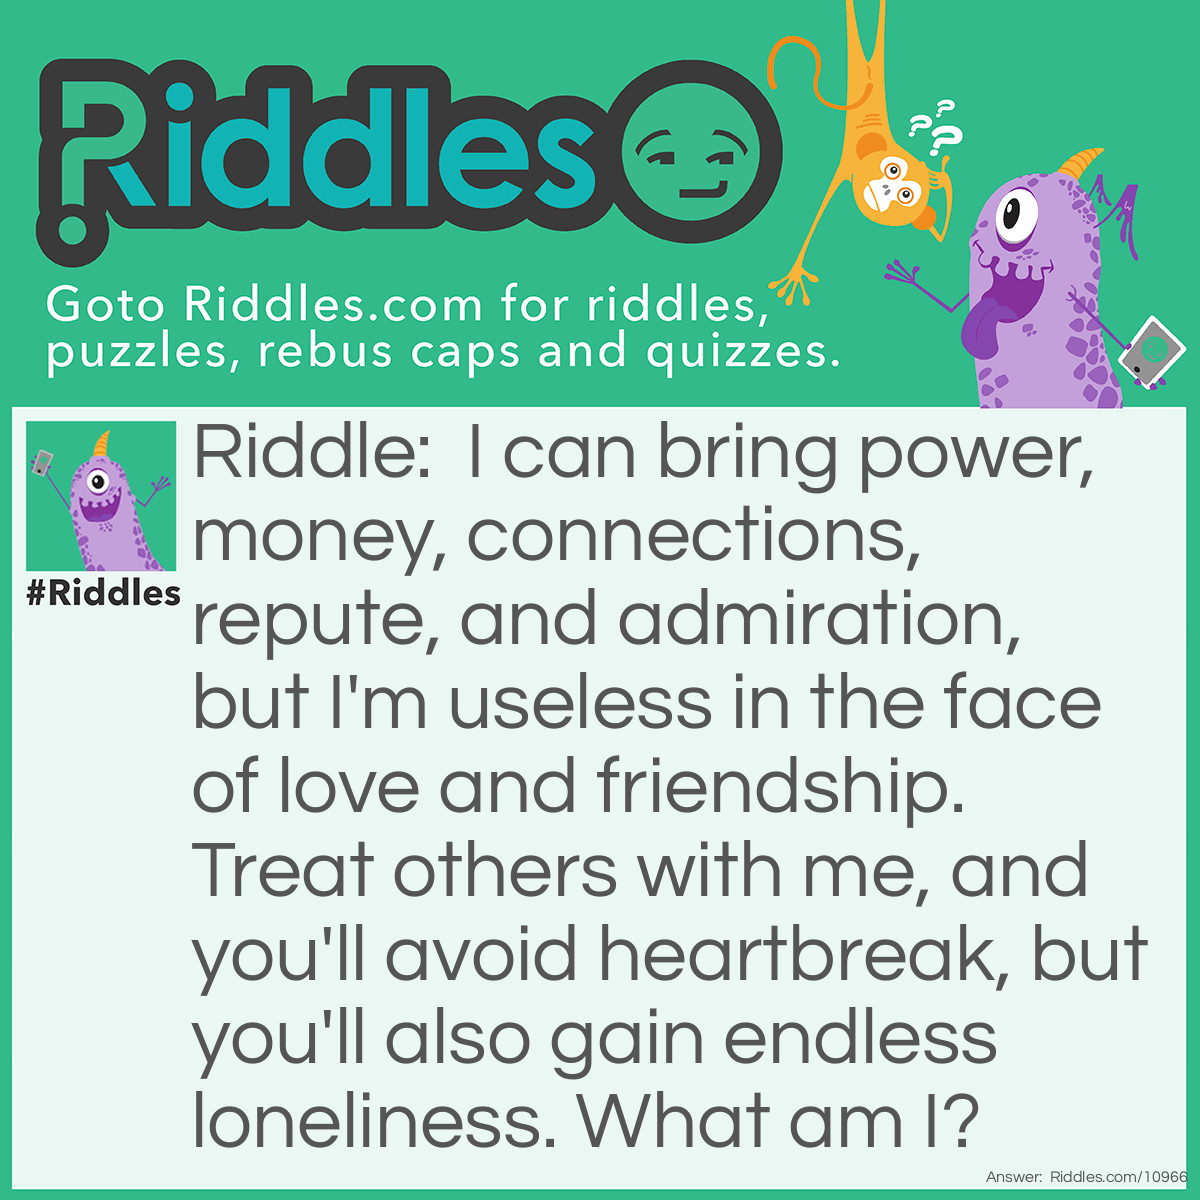 Riddle: I can bring power, money, connections, repute, and admiration, but I'm useless in the face of love and friendship. Treat others with me, and you'll avoid heartbreak, but you'll also gain endless loneliness. What am I? Answer: Disguise.